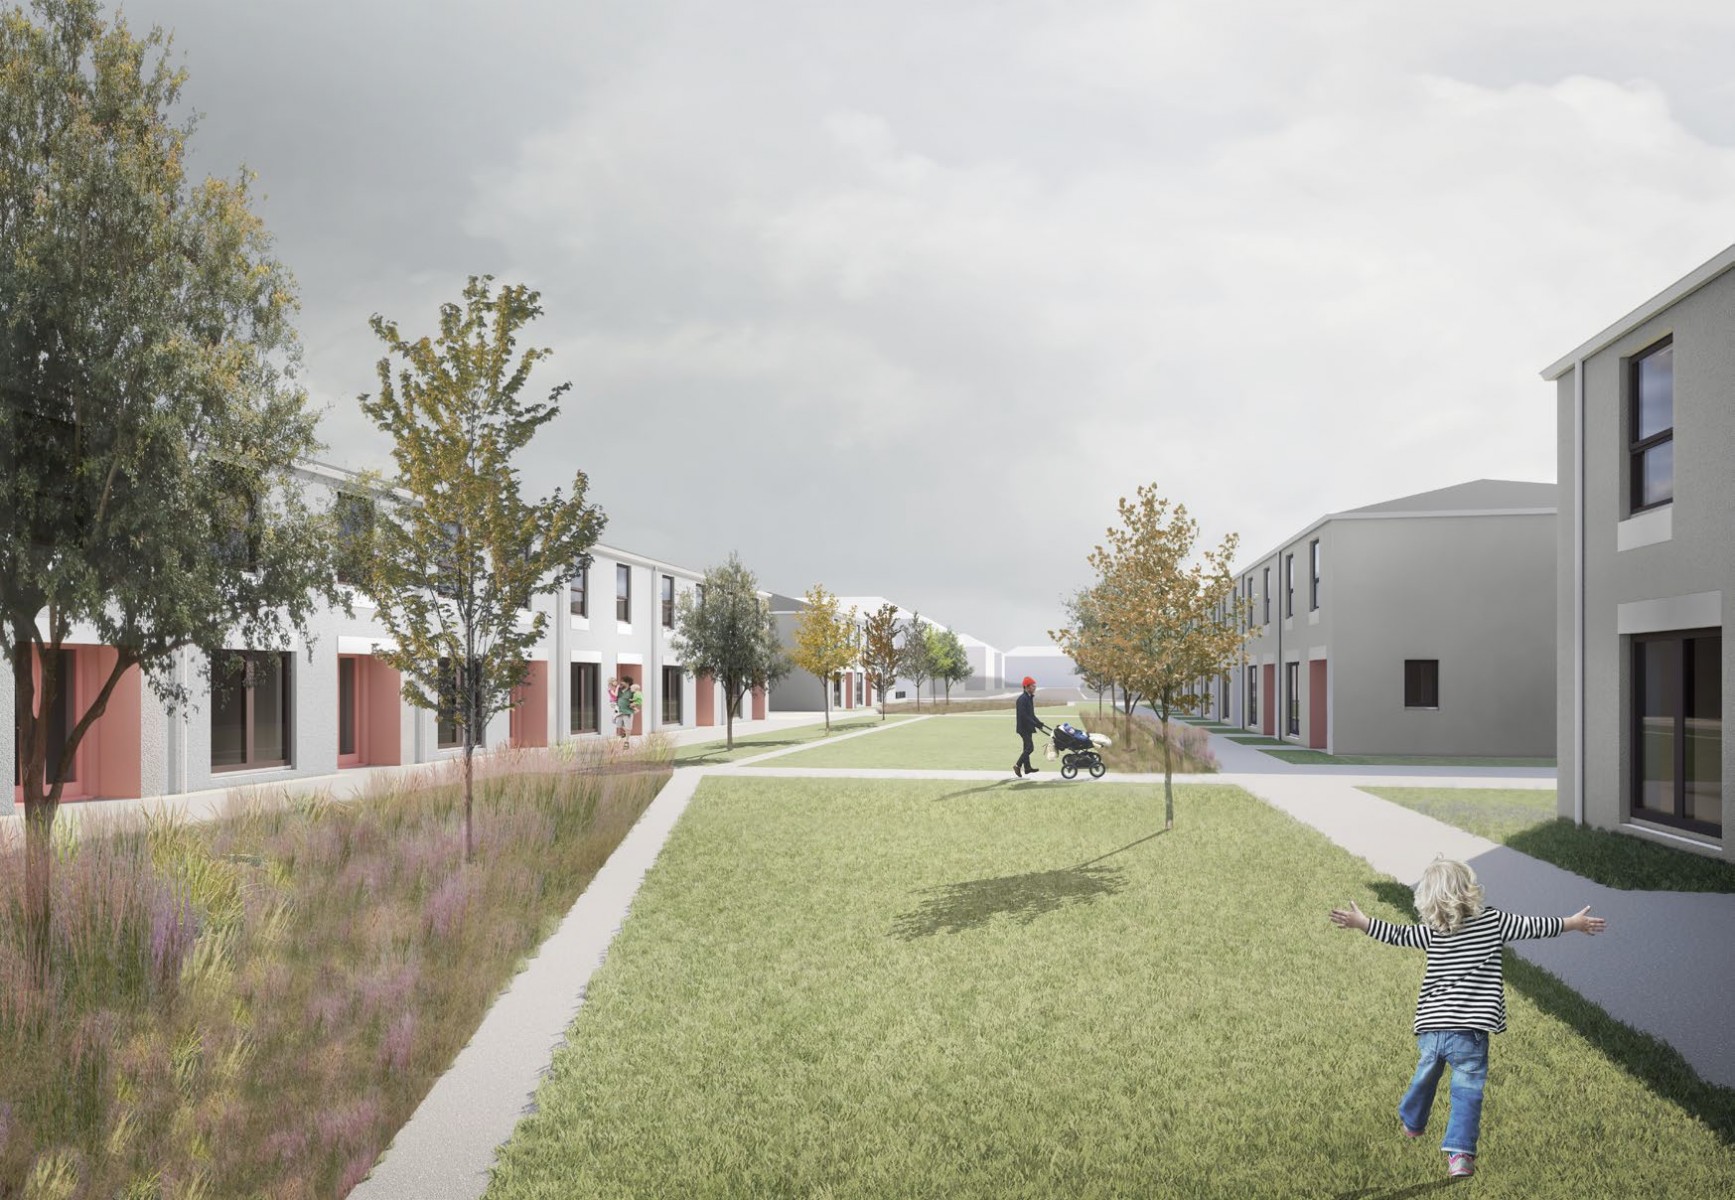 Glasgow school site acquisition paves way for 70-home planning submission